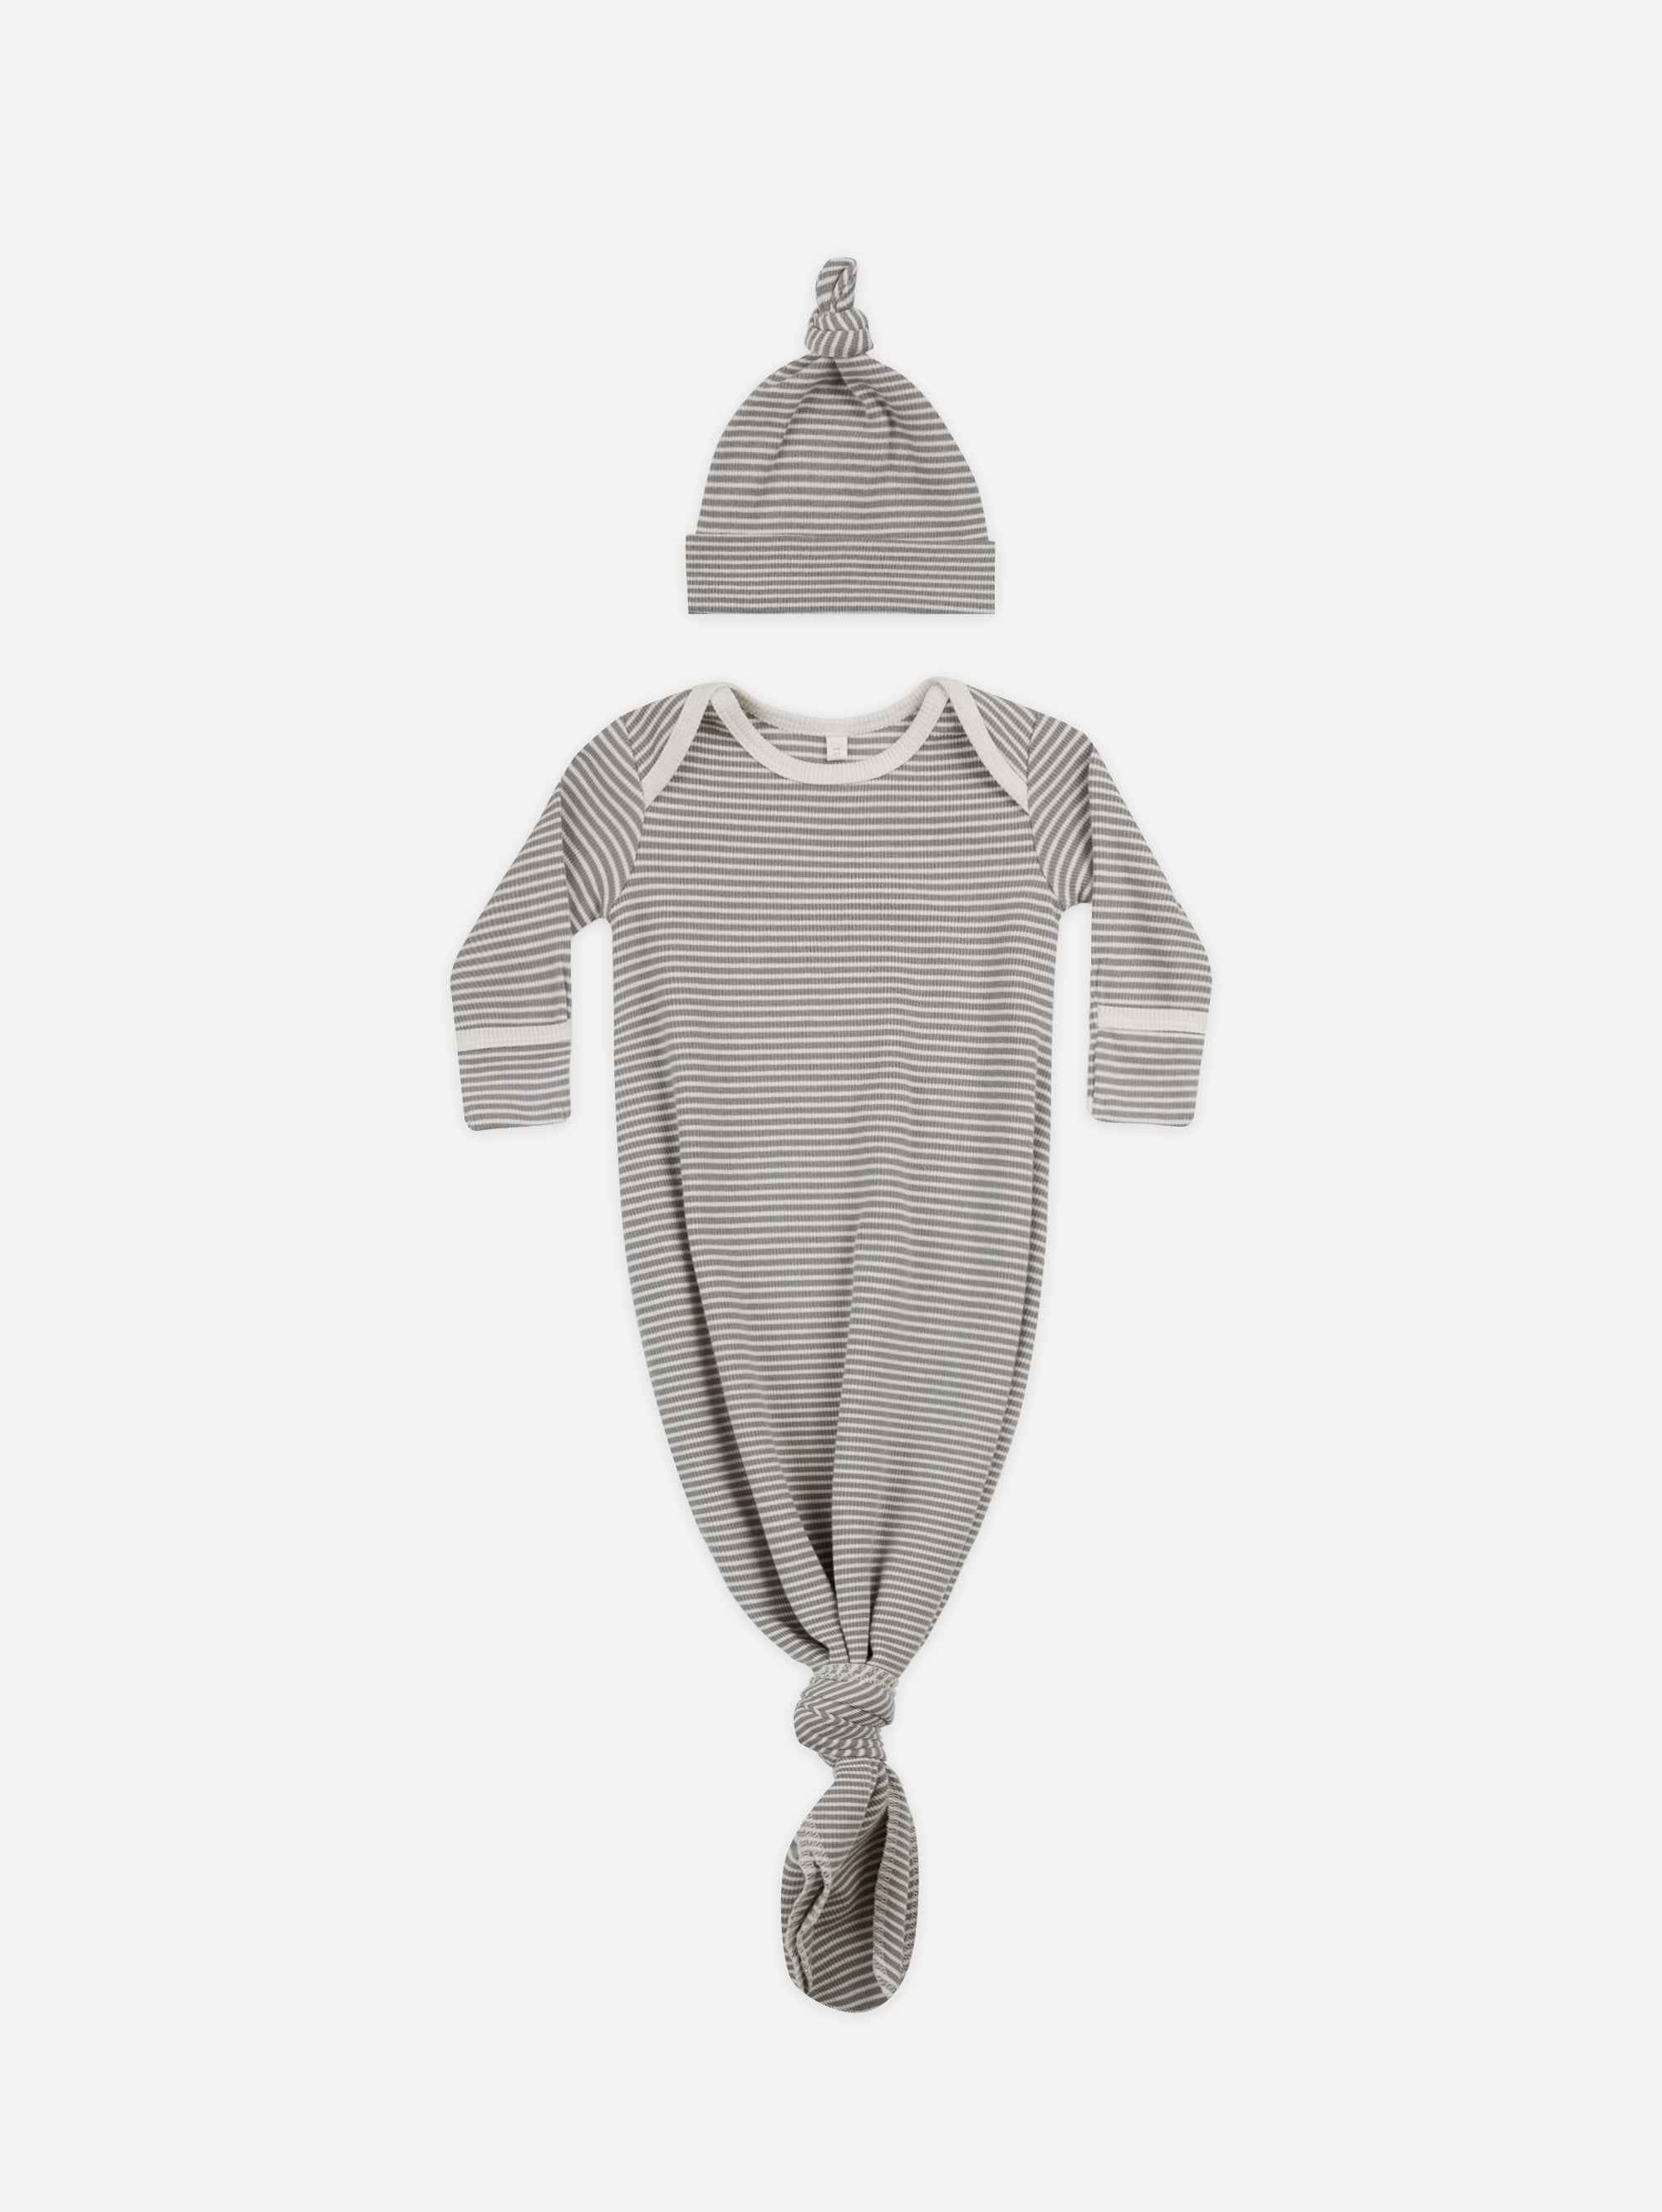 Knotted Baby Gown + Hat Set || Lagoon Micro Stripe - Rylee + Cru | Kids Clothes | Trendy Baby Clothes | Modern Infant Outfits |